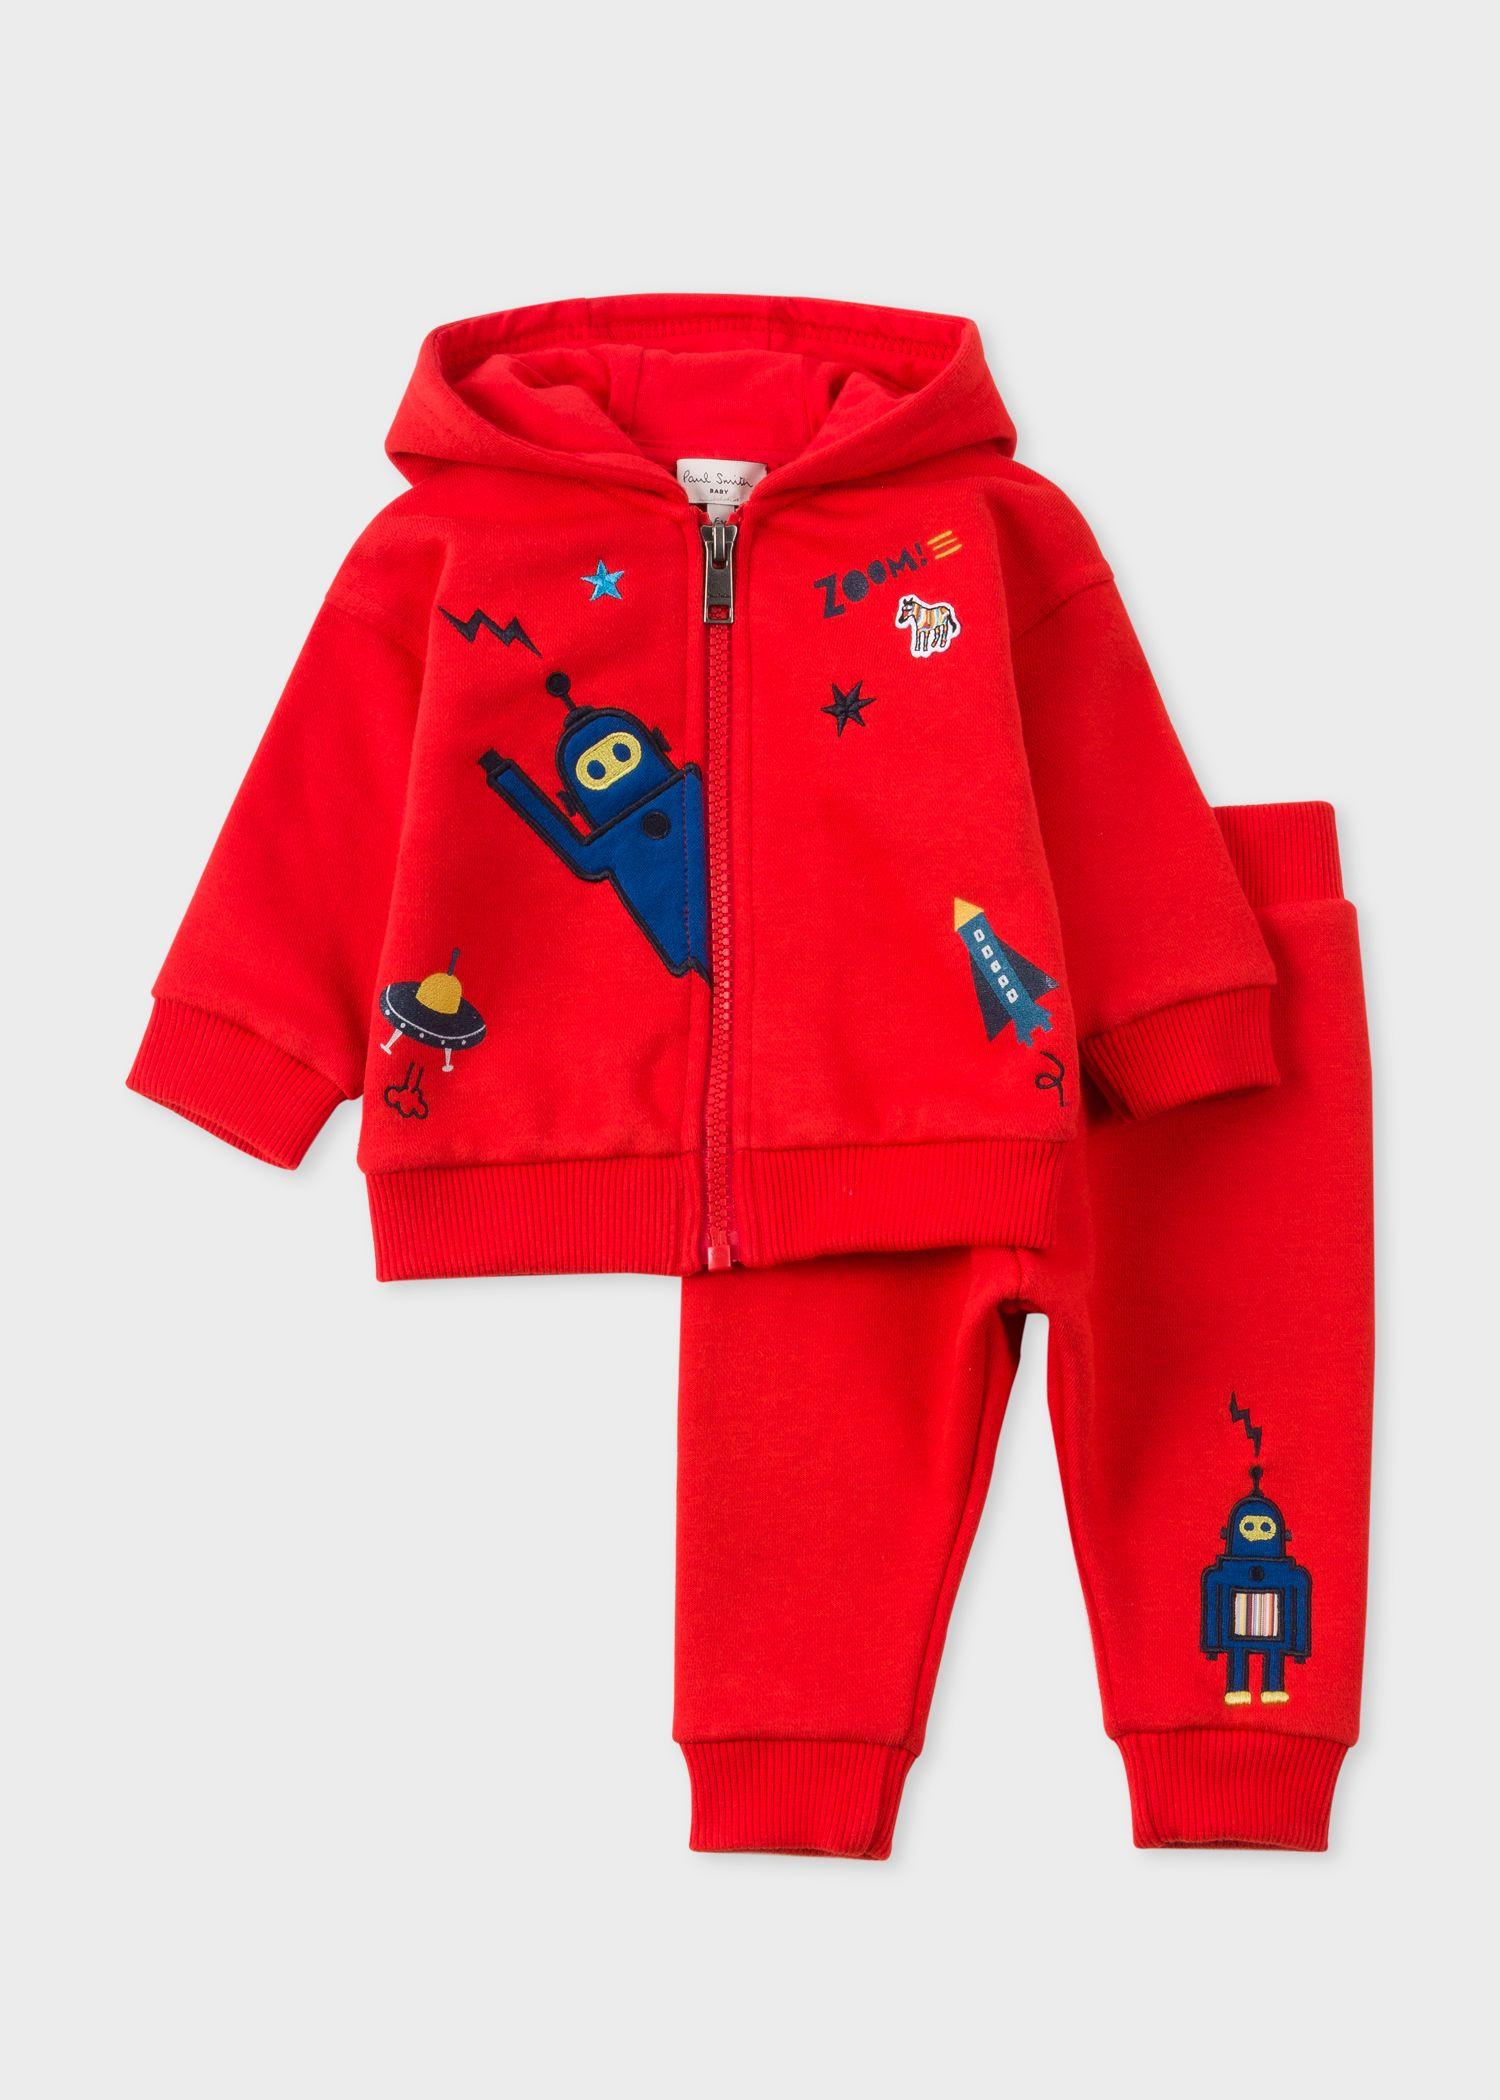 Red Robot Logo - Baby Boys' Red 'Robot' Tracksuit Set With 'Zebra' Logo Smith Asia